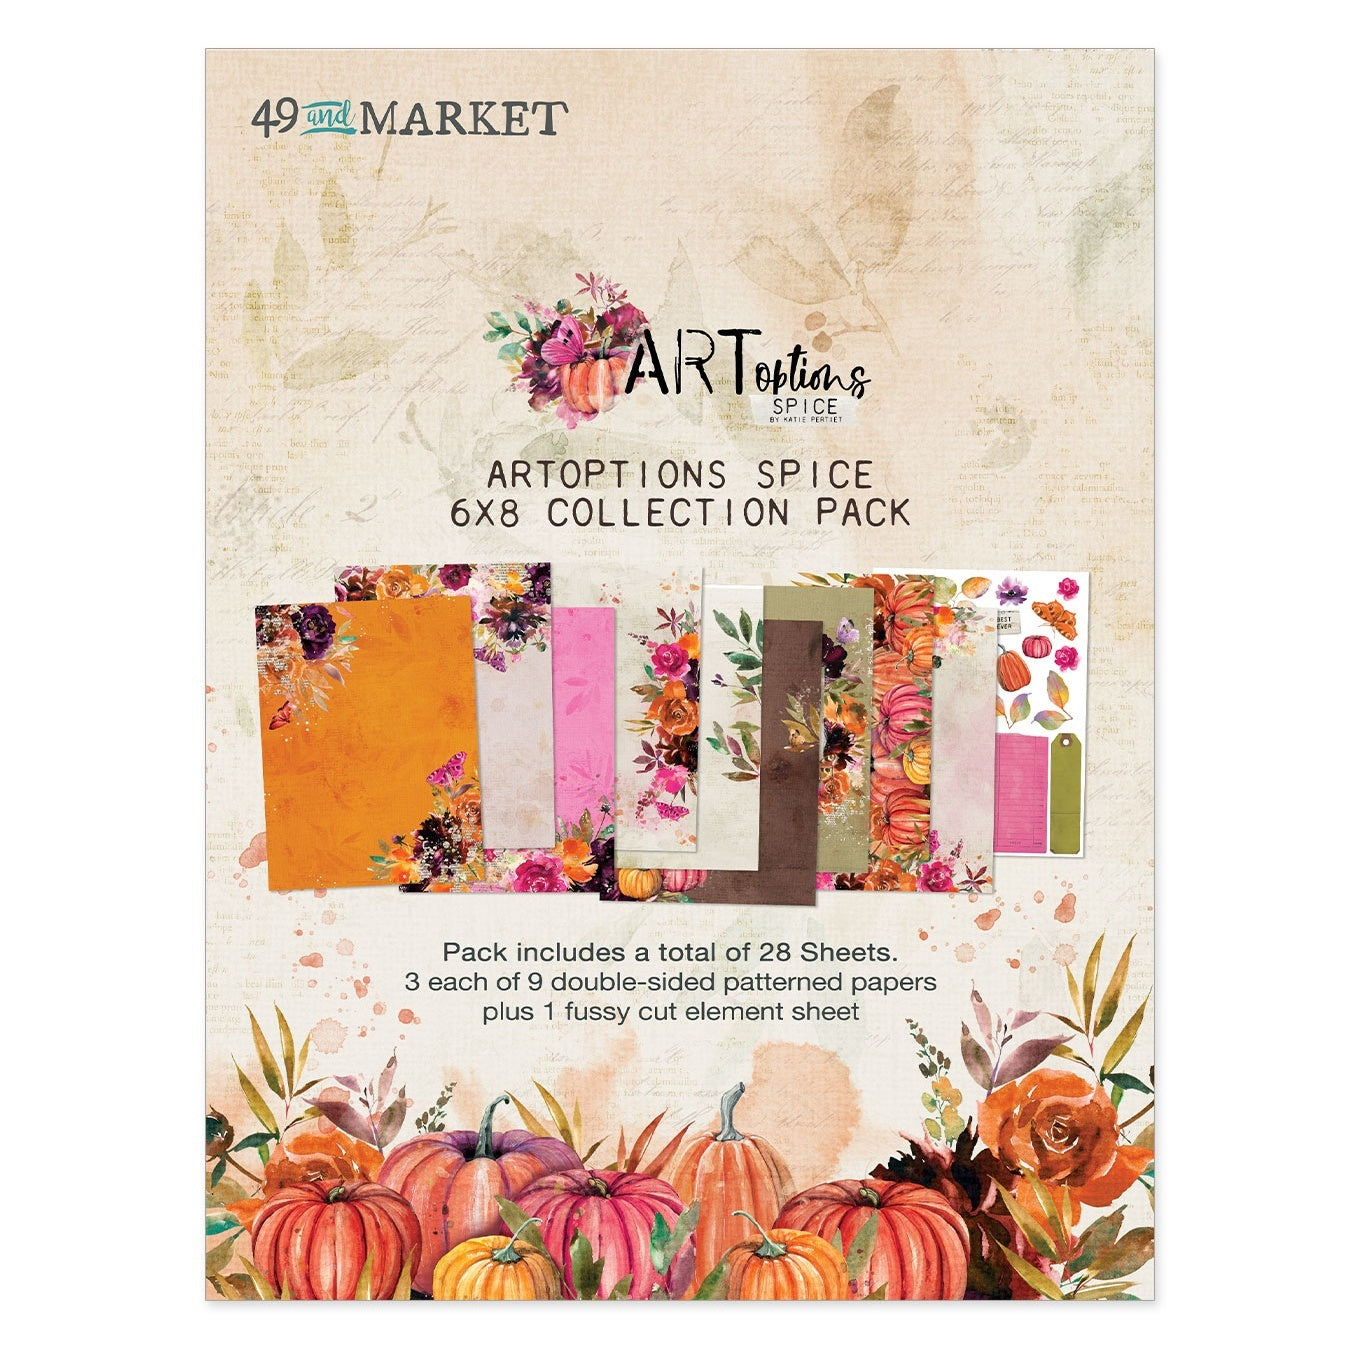 49 and Market 6 x 8 Mini Collection  -  Art Options Spice